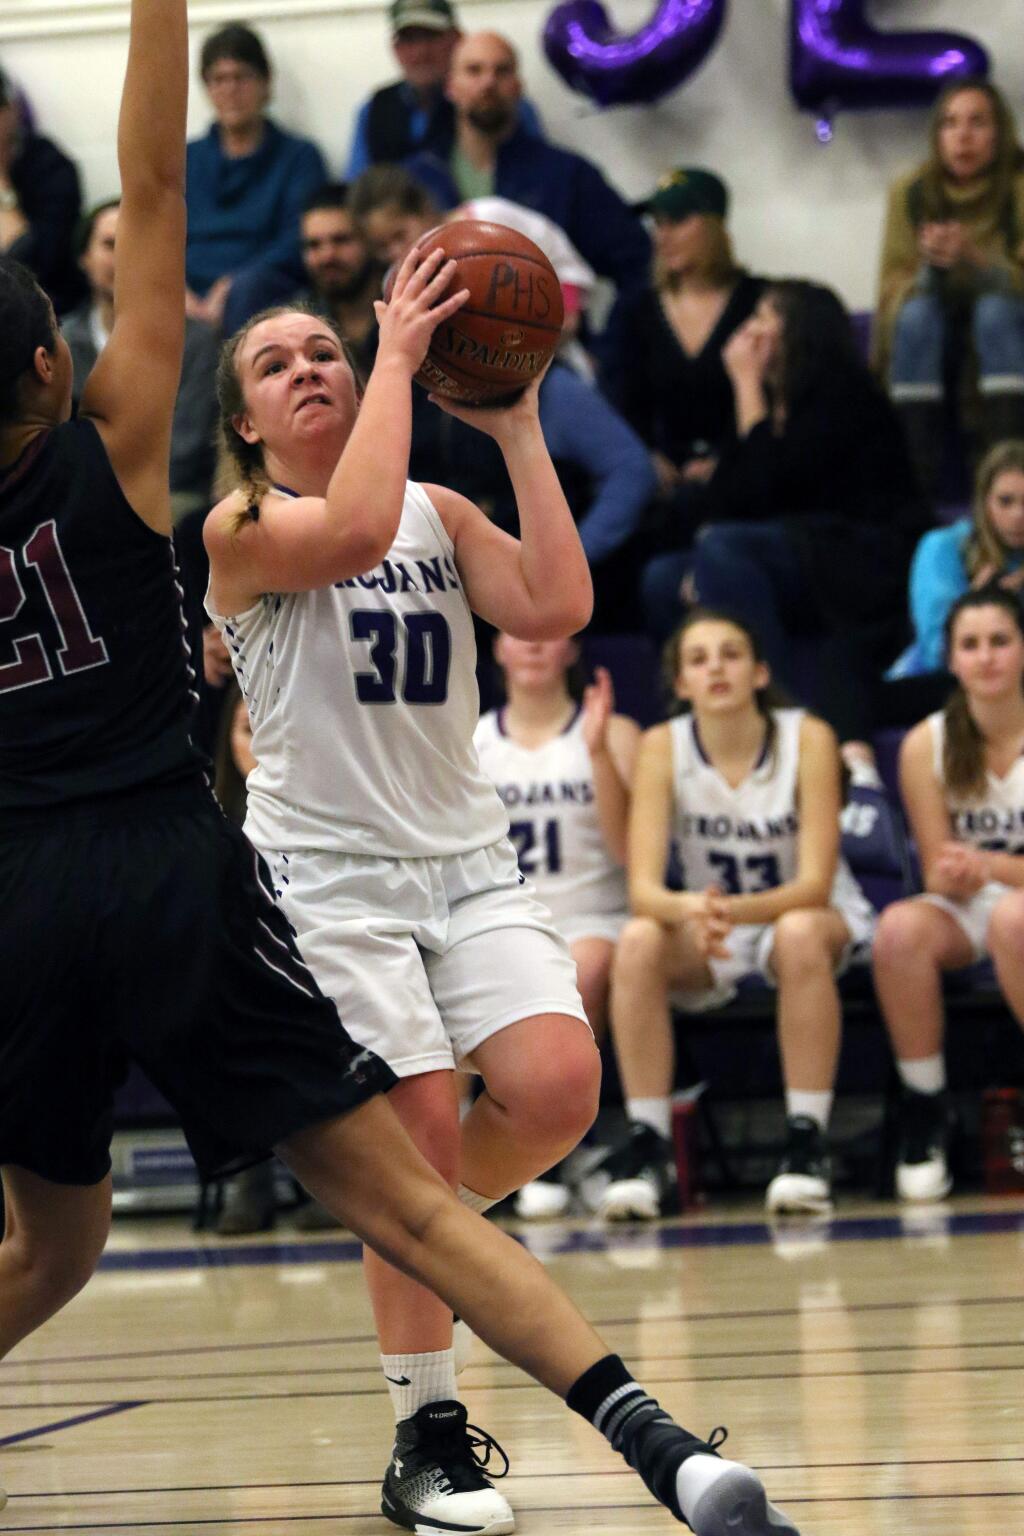 DWIGHT SUGIOKA/ FOR THE ARGUS-COURIERPetaluma senior Emily O'Keefe takes the ball to hoop against Healdsburg in her final home game for the T-Girls.